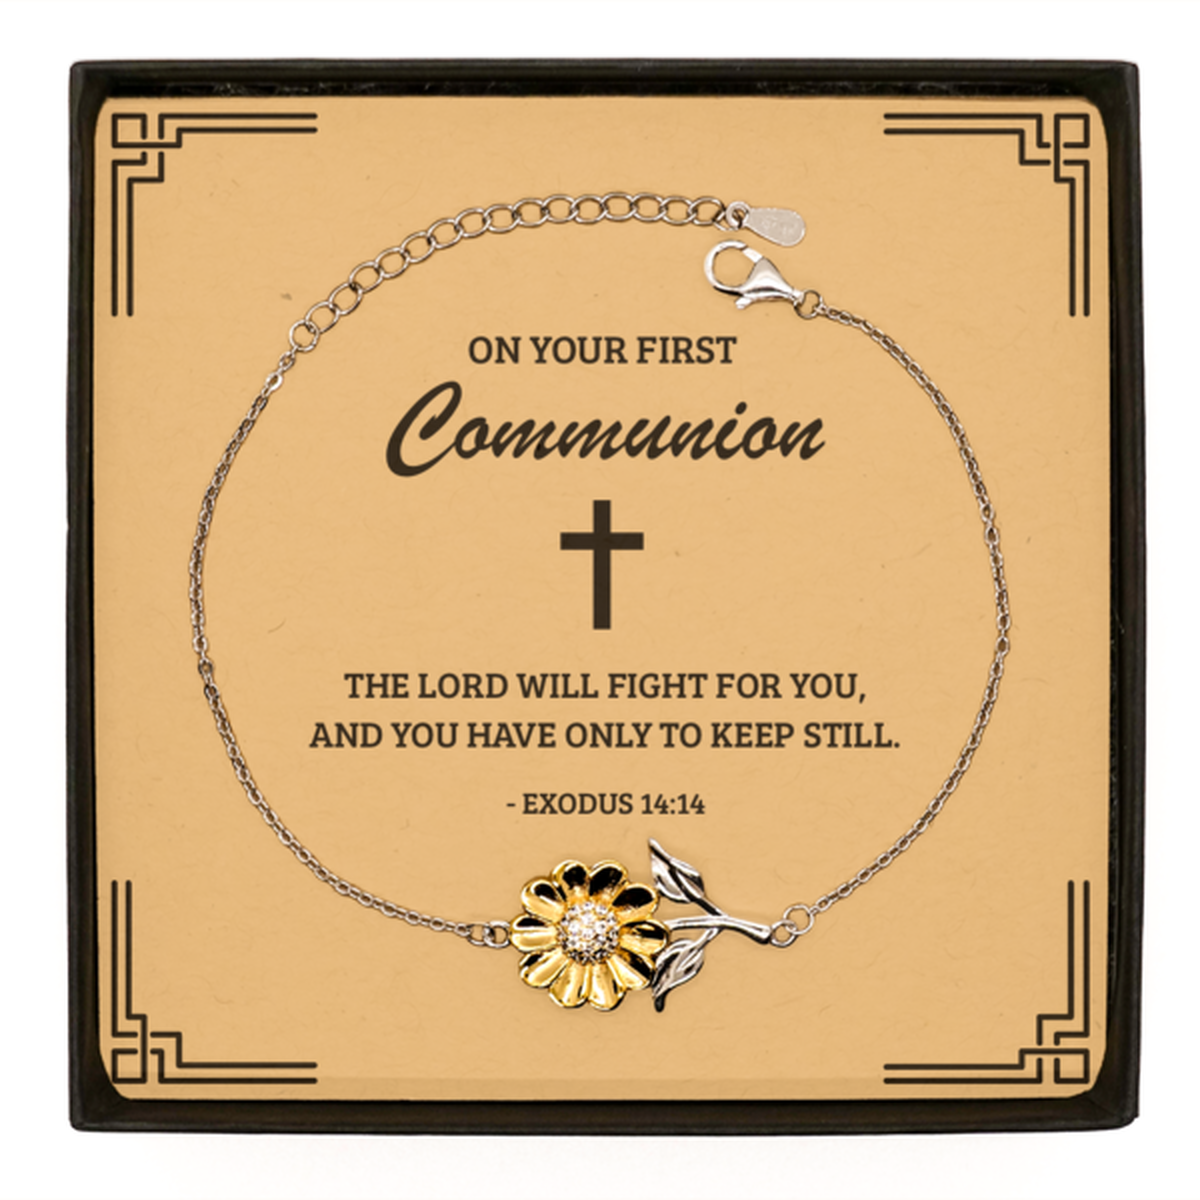 First Communion Gifts for Teenage Girls, The Lord will fight for you, .925 Sterling Silver Sunflower Bracelet with Bible Verse Message Card, Religious Catholic Bracelet for Daughter, Granddaughter